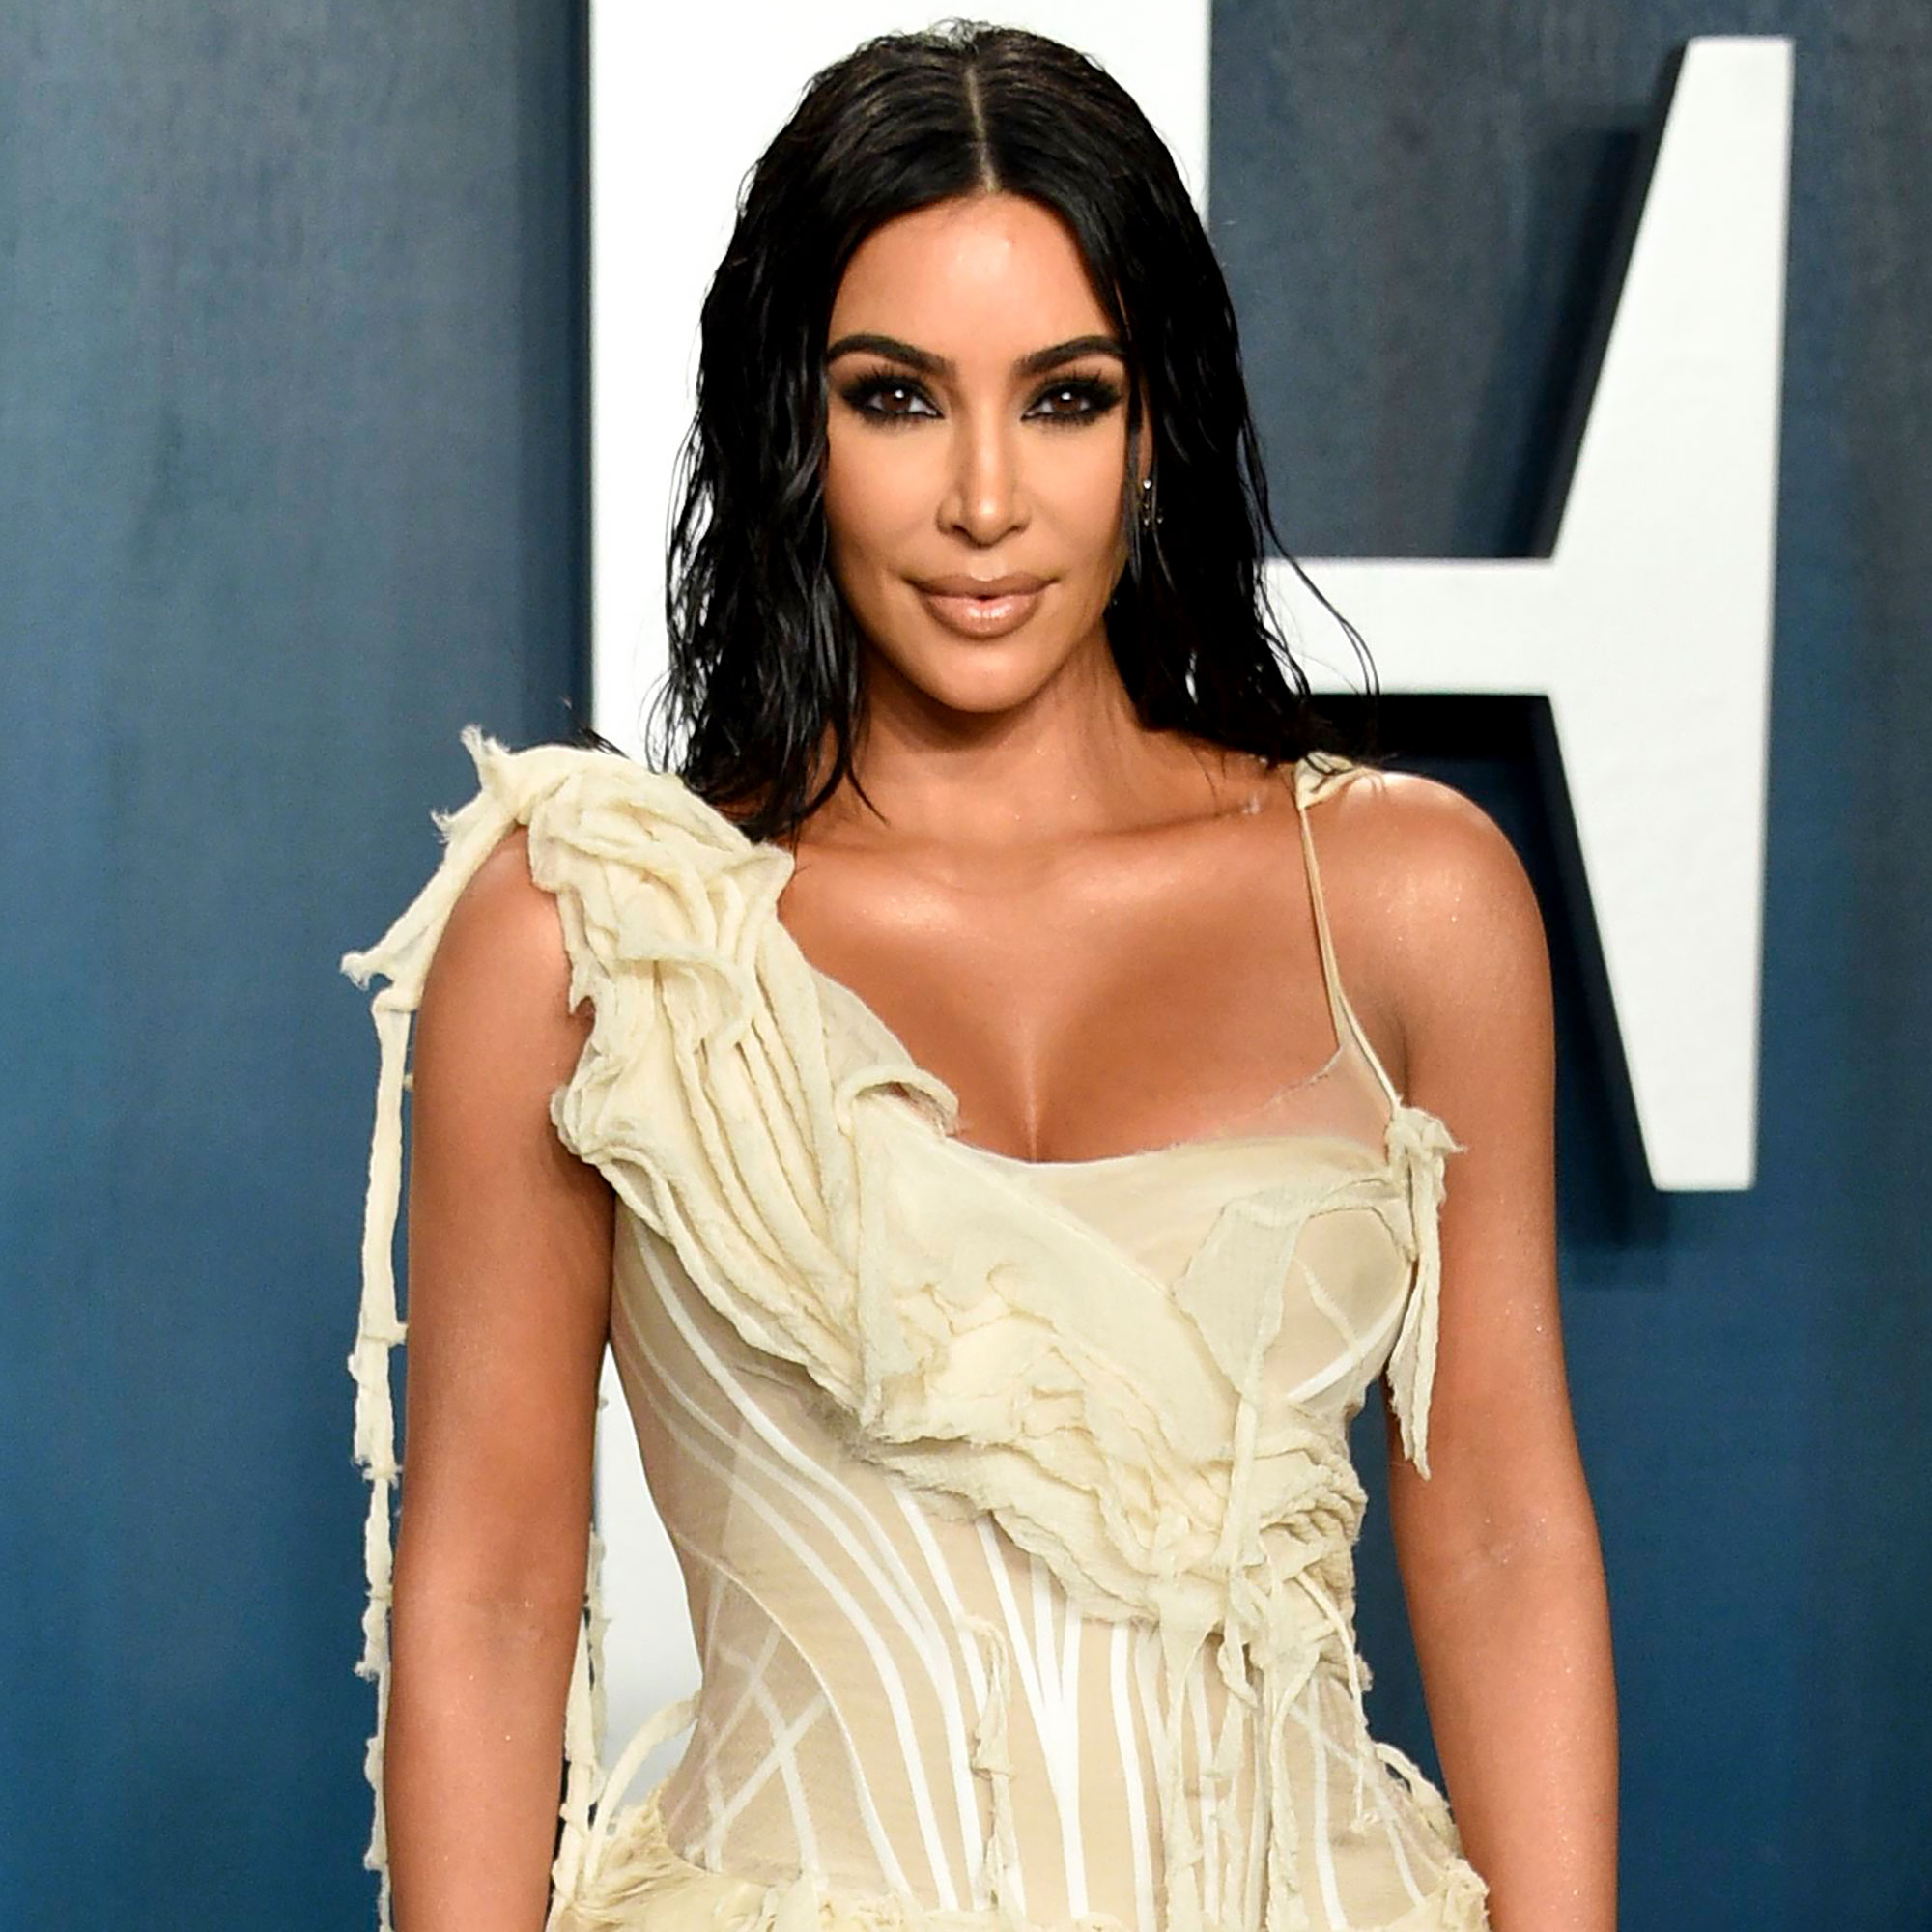 Kim Kardashian's Plastic Surgery Confessions: Injections and More